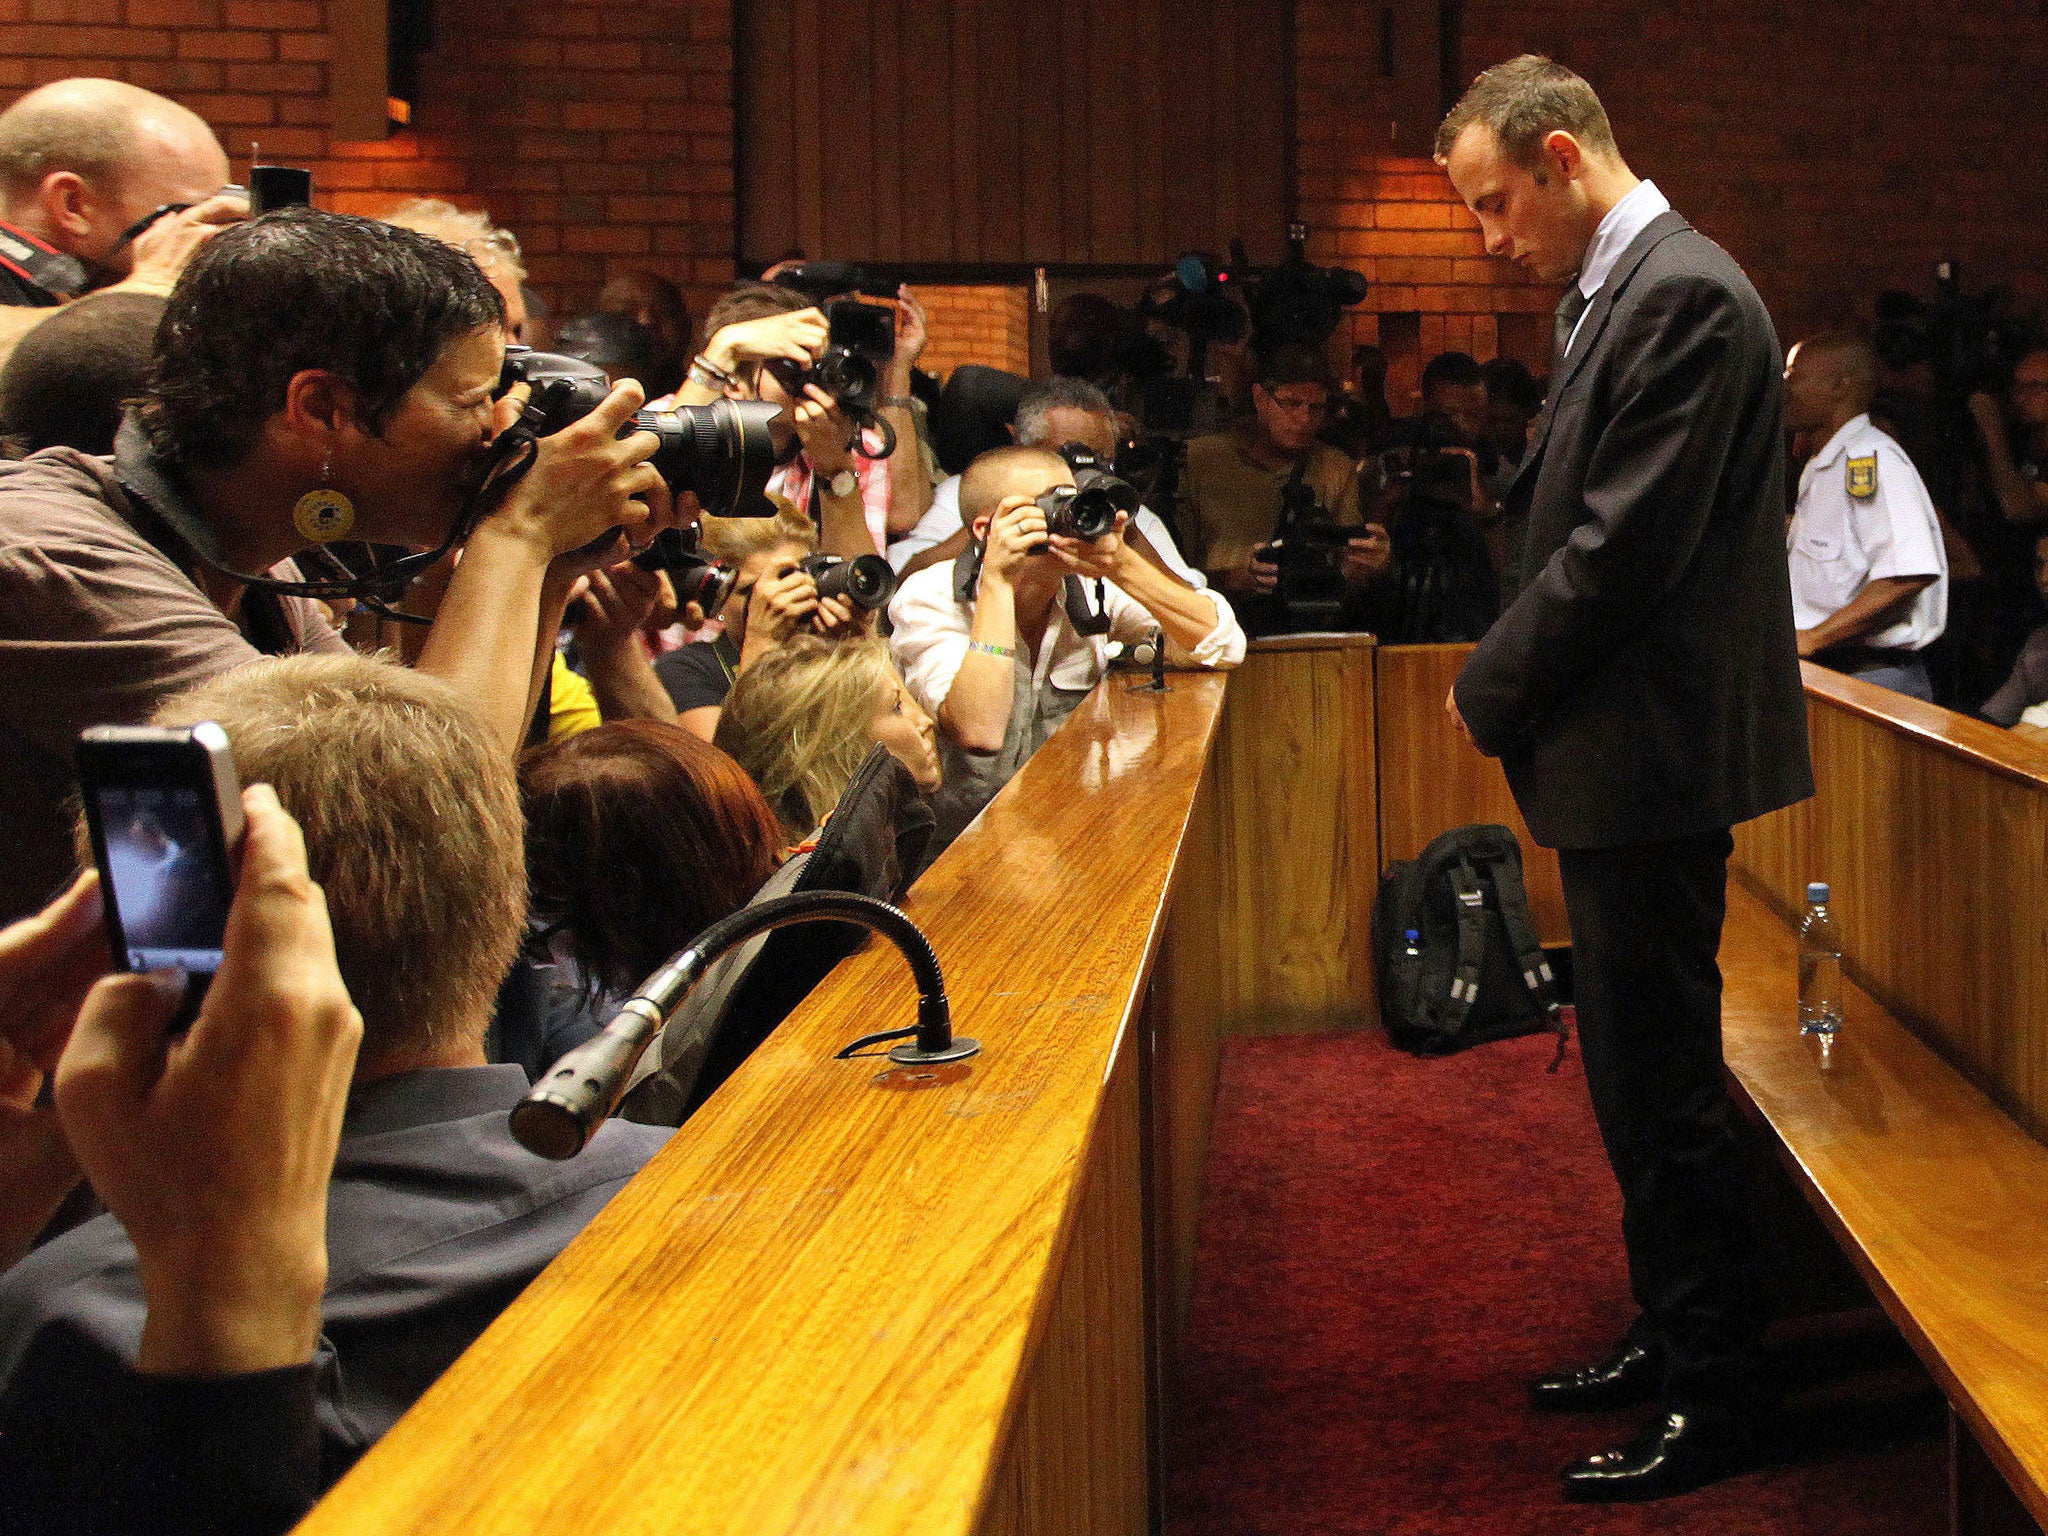 Oscar Pistorius at his bail hearing in February